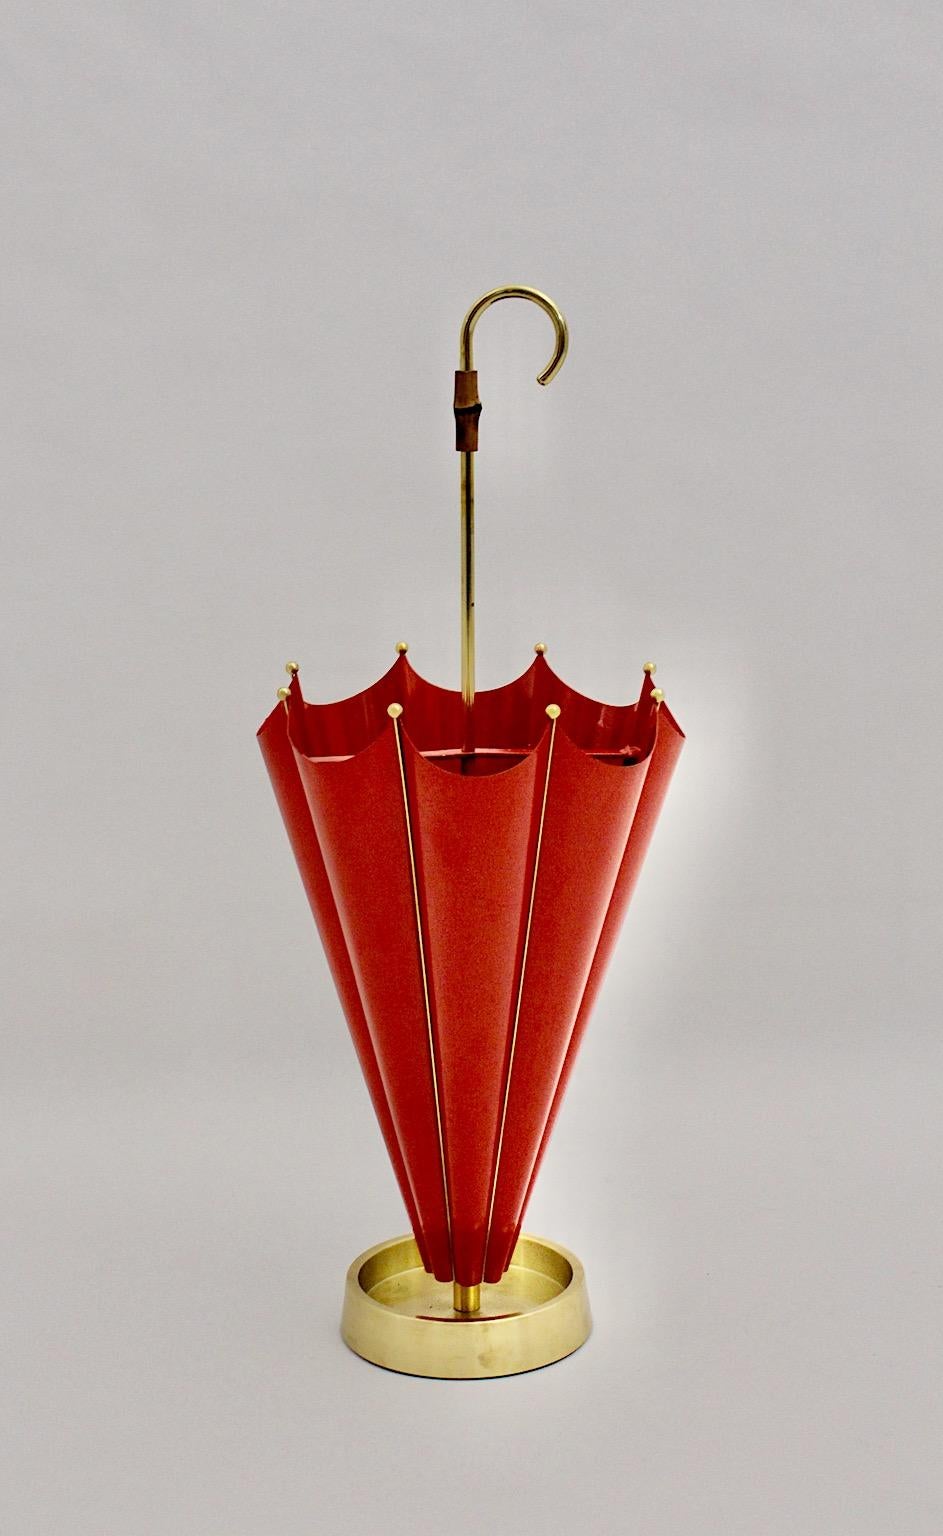 Italian Mid-Century Modern Vintage Red Metal Brass Umbrella Stand Cane Holder 1950 Italy For Sale